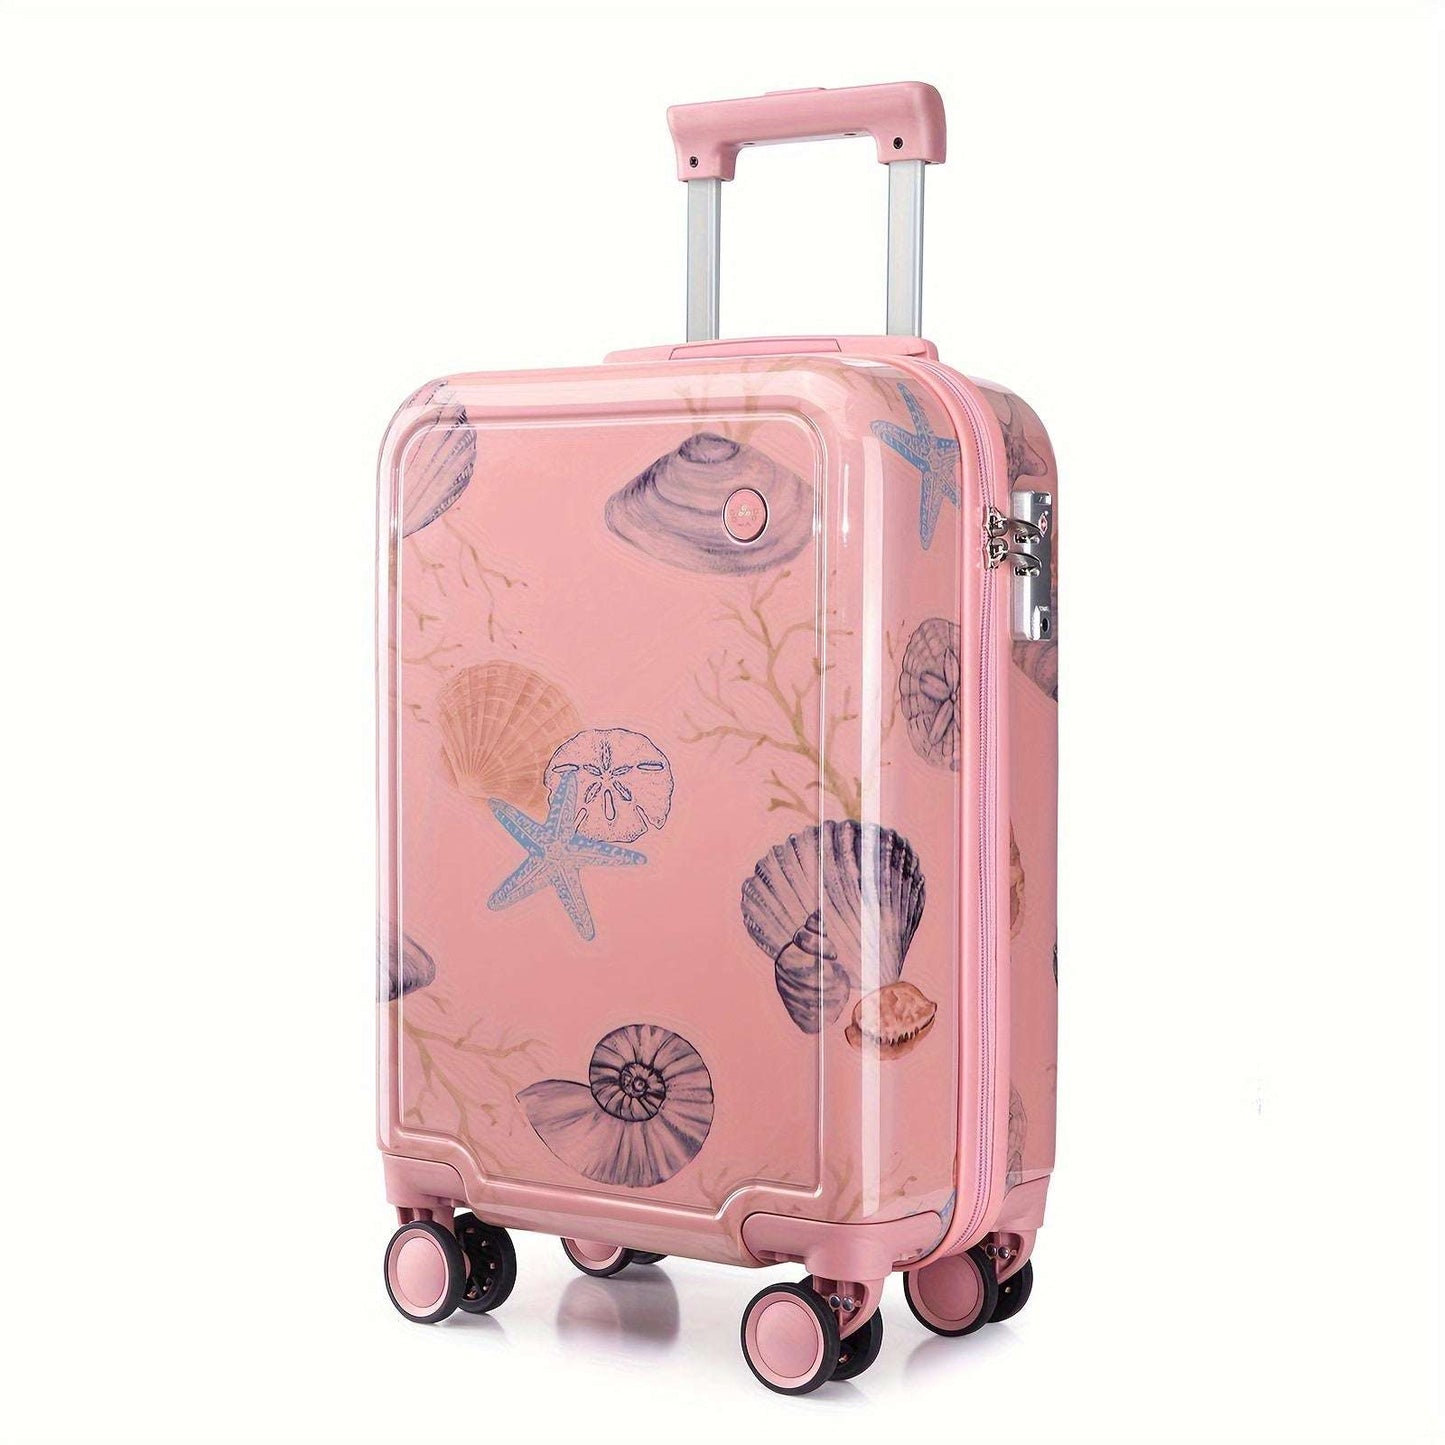 Somago Carry-On Travel Suitcase - Lightweight, Cute, and Personality-Filled Hard Shell Luggage with Telescopic Handle 135 Luggage Somago OK•PhotoFineArt